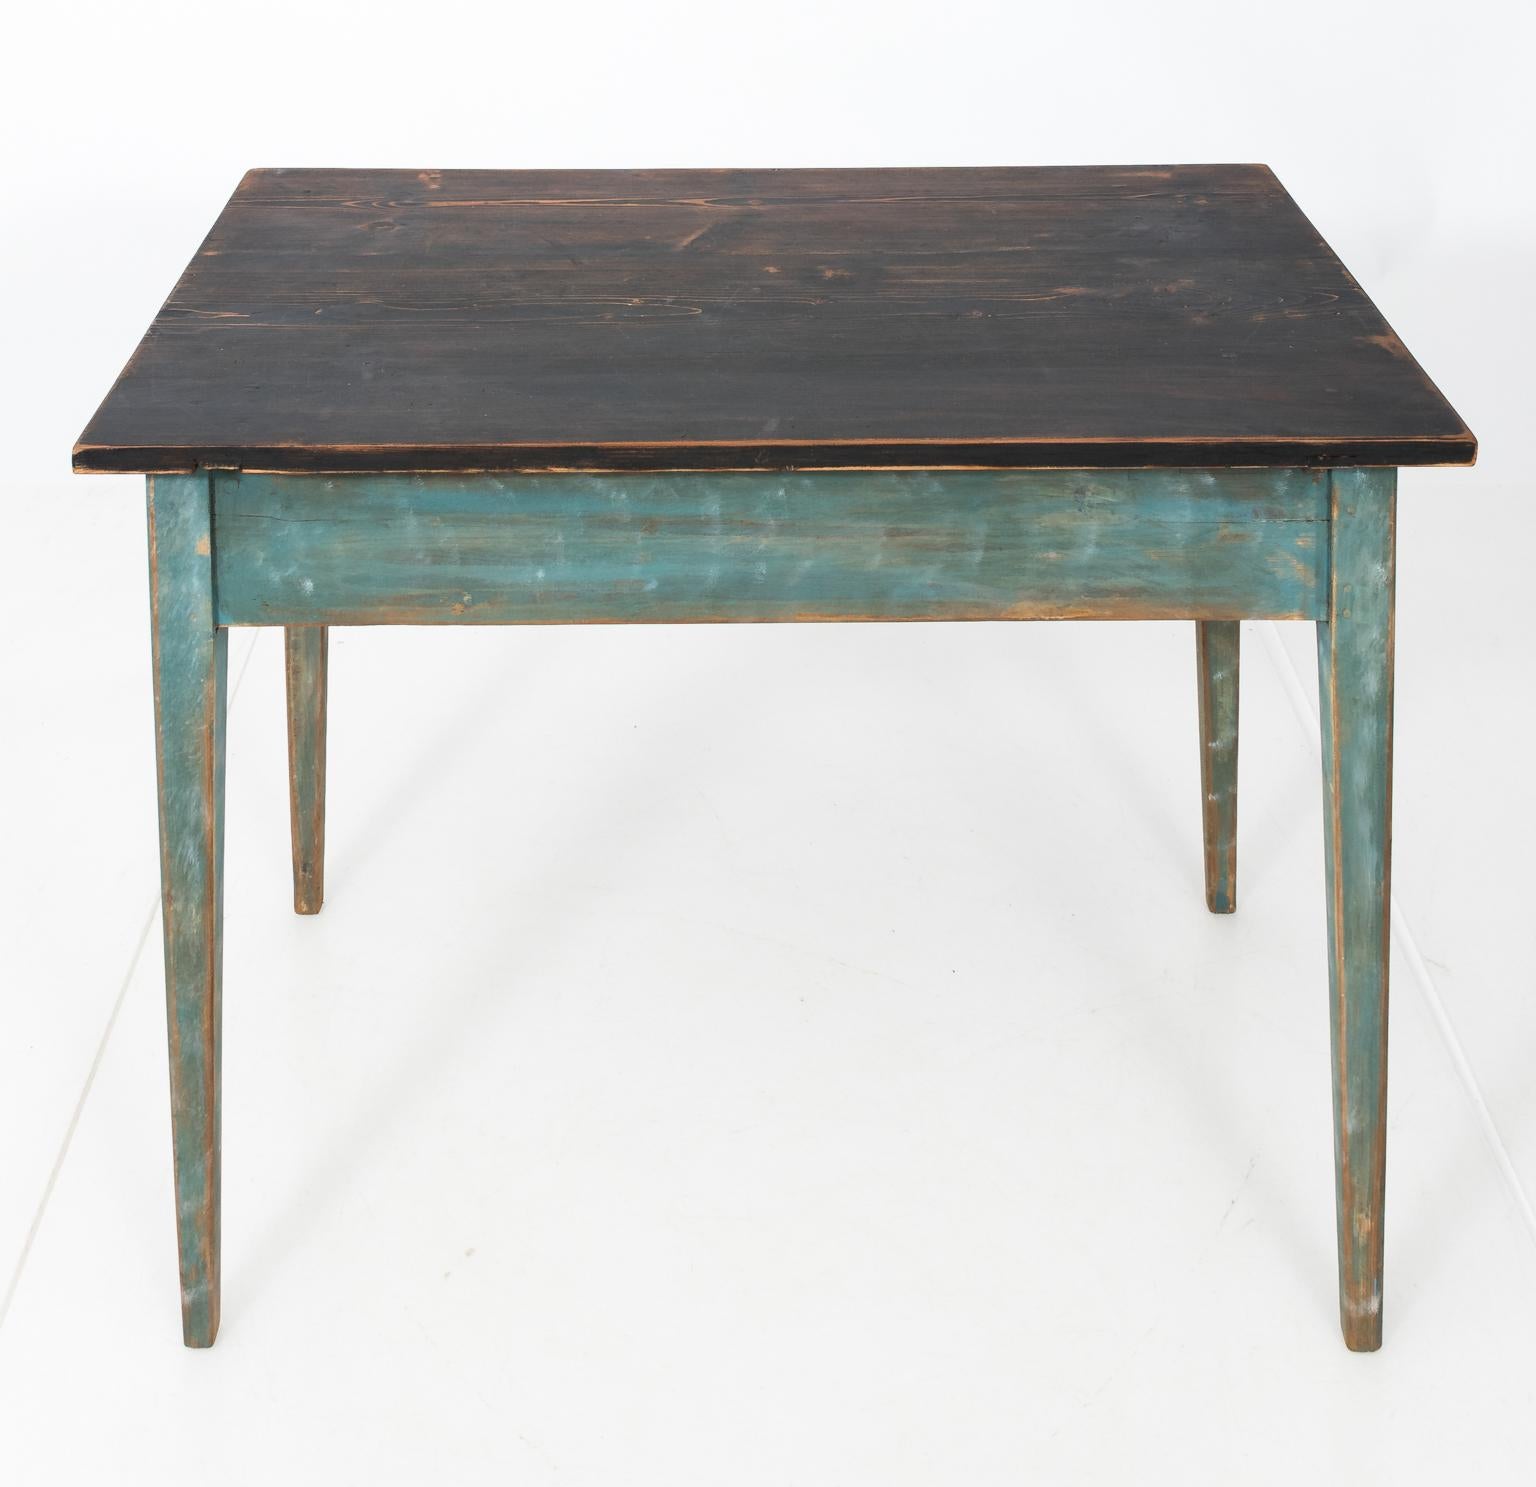 Mid-1800s Blue Painted Table with Black Painted Top im Angebot 1